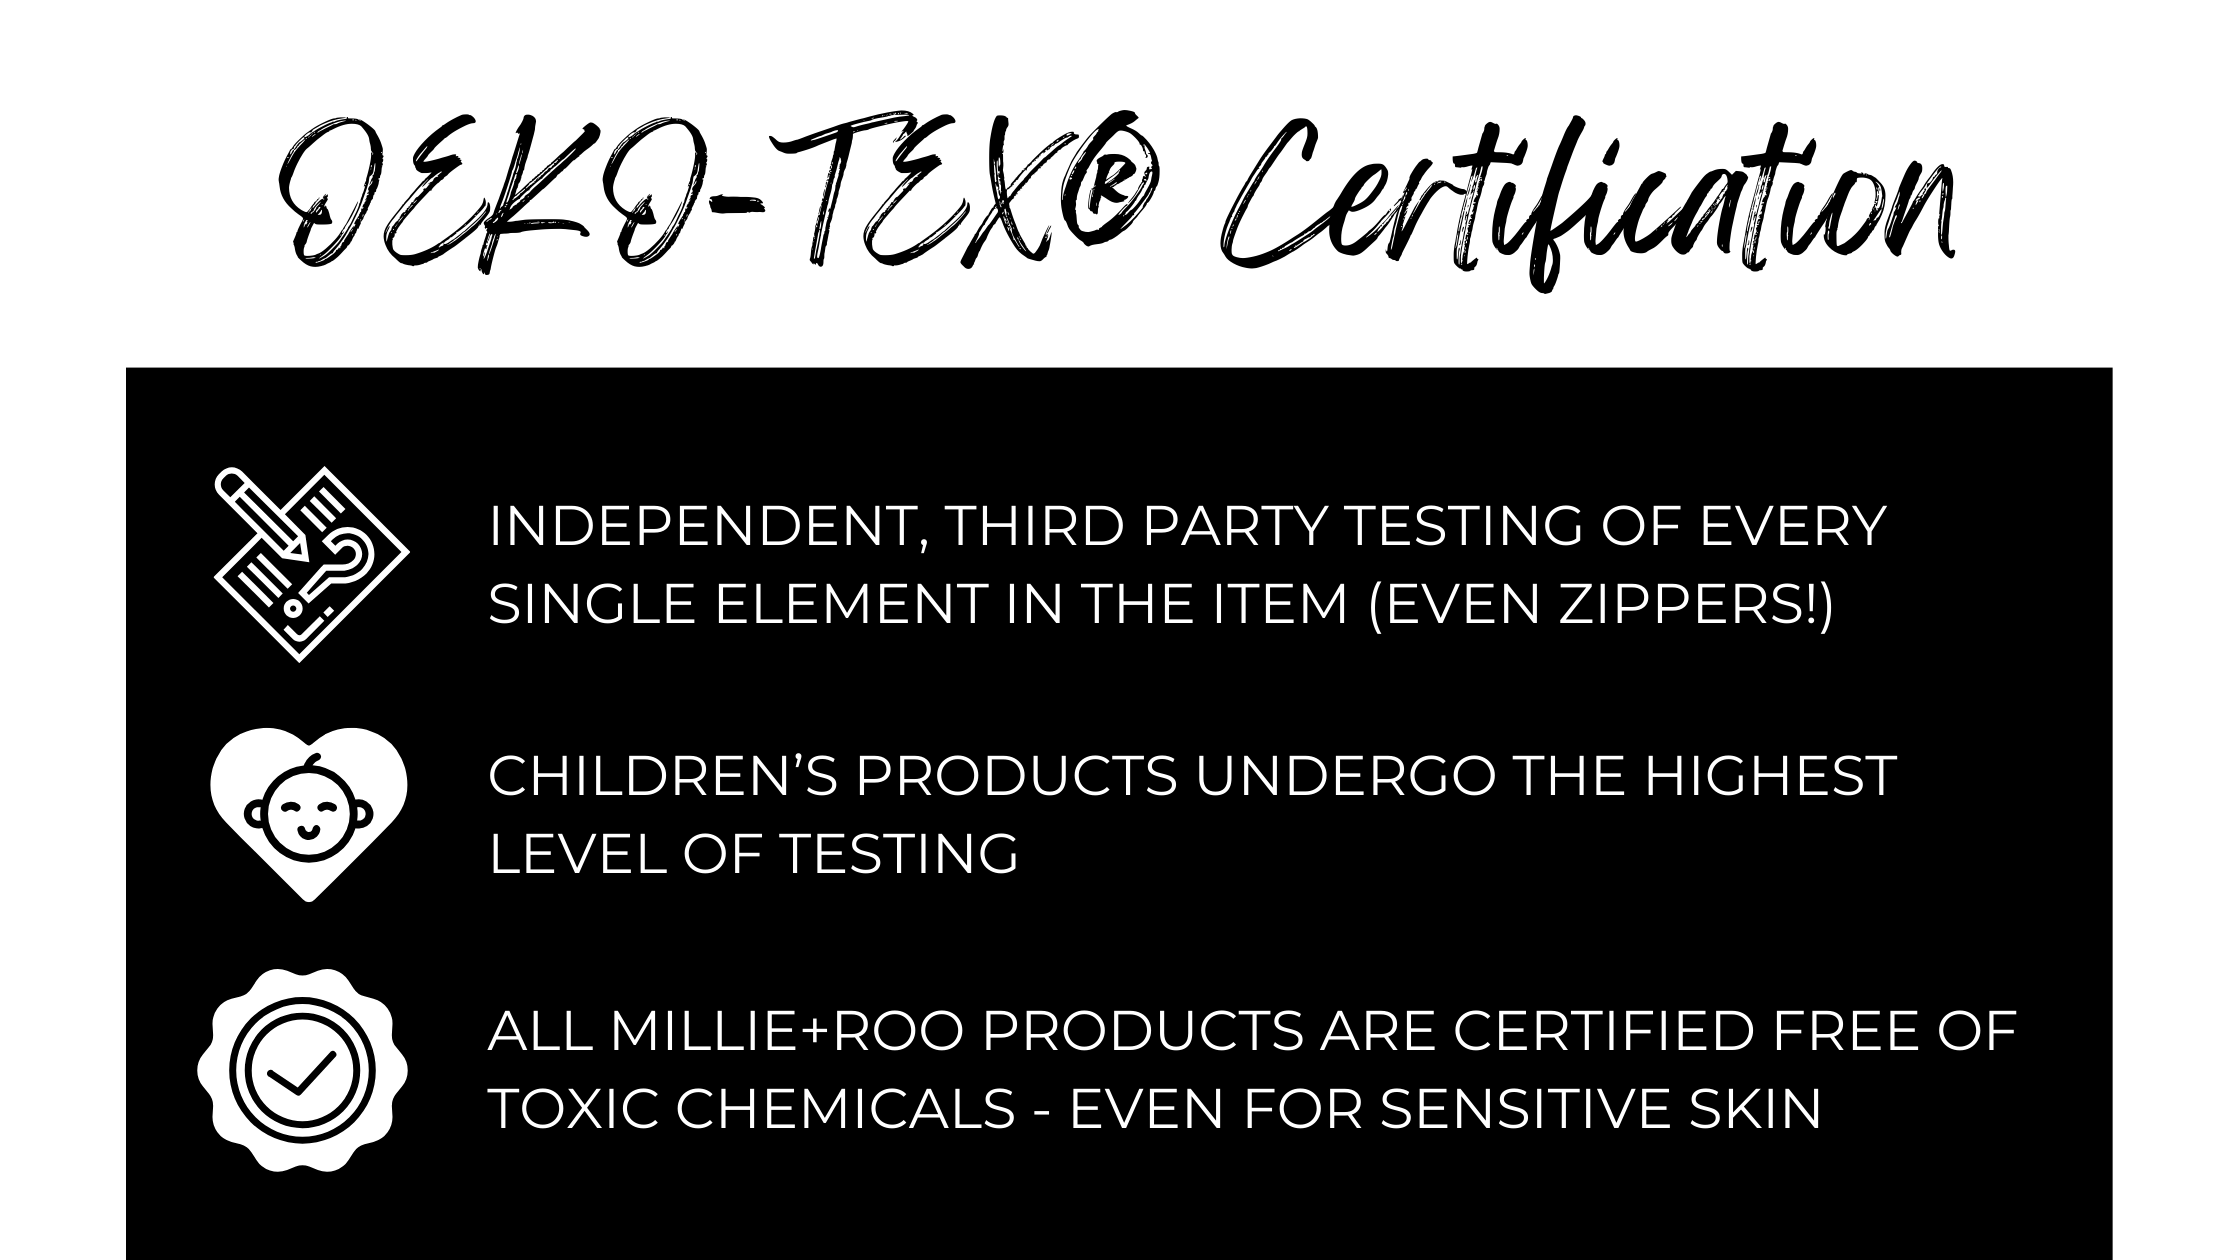 What OEKO-TEX certification means - and why it matters